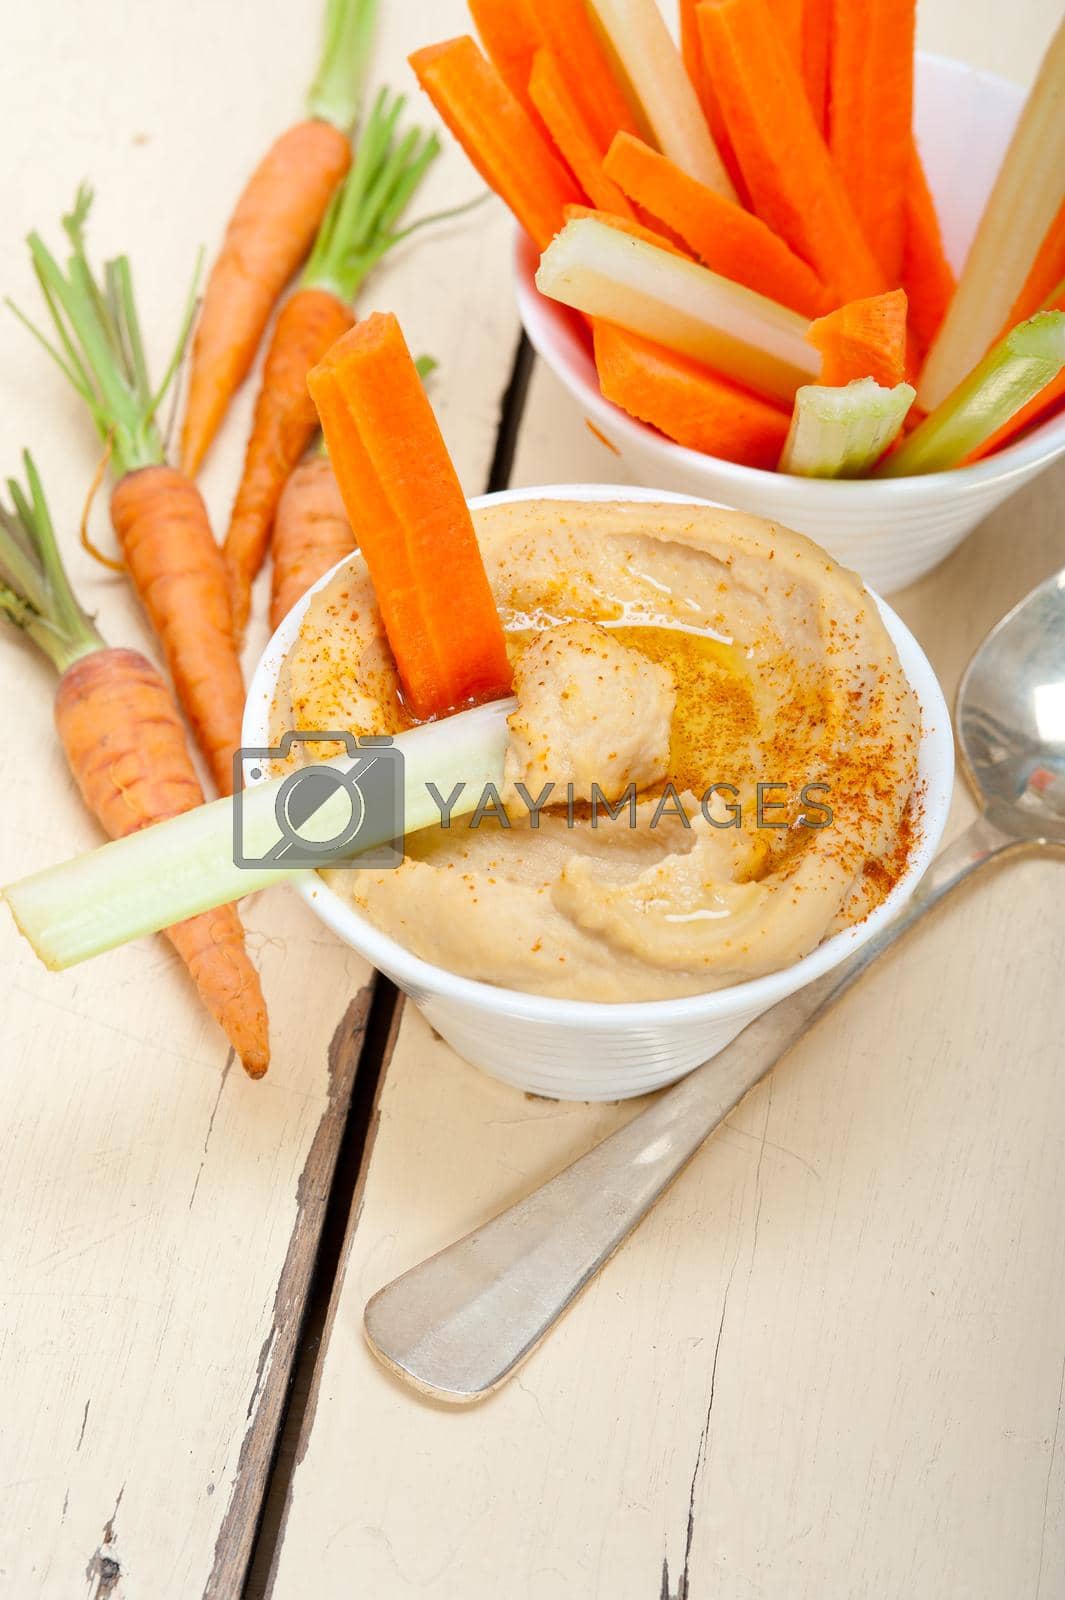 Royalty free image of fresh hummus dip with raw carrot and celery  by keko64